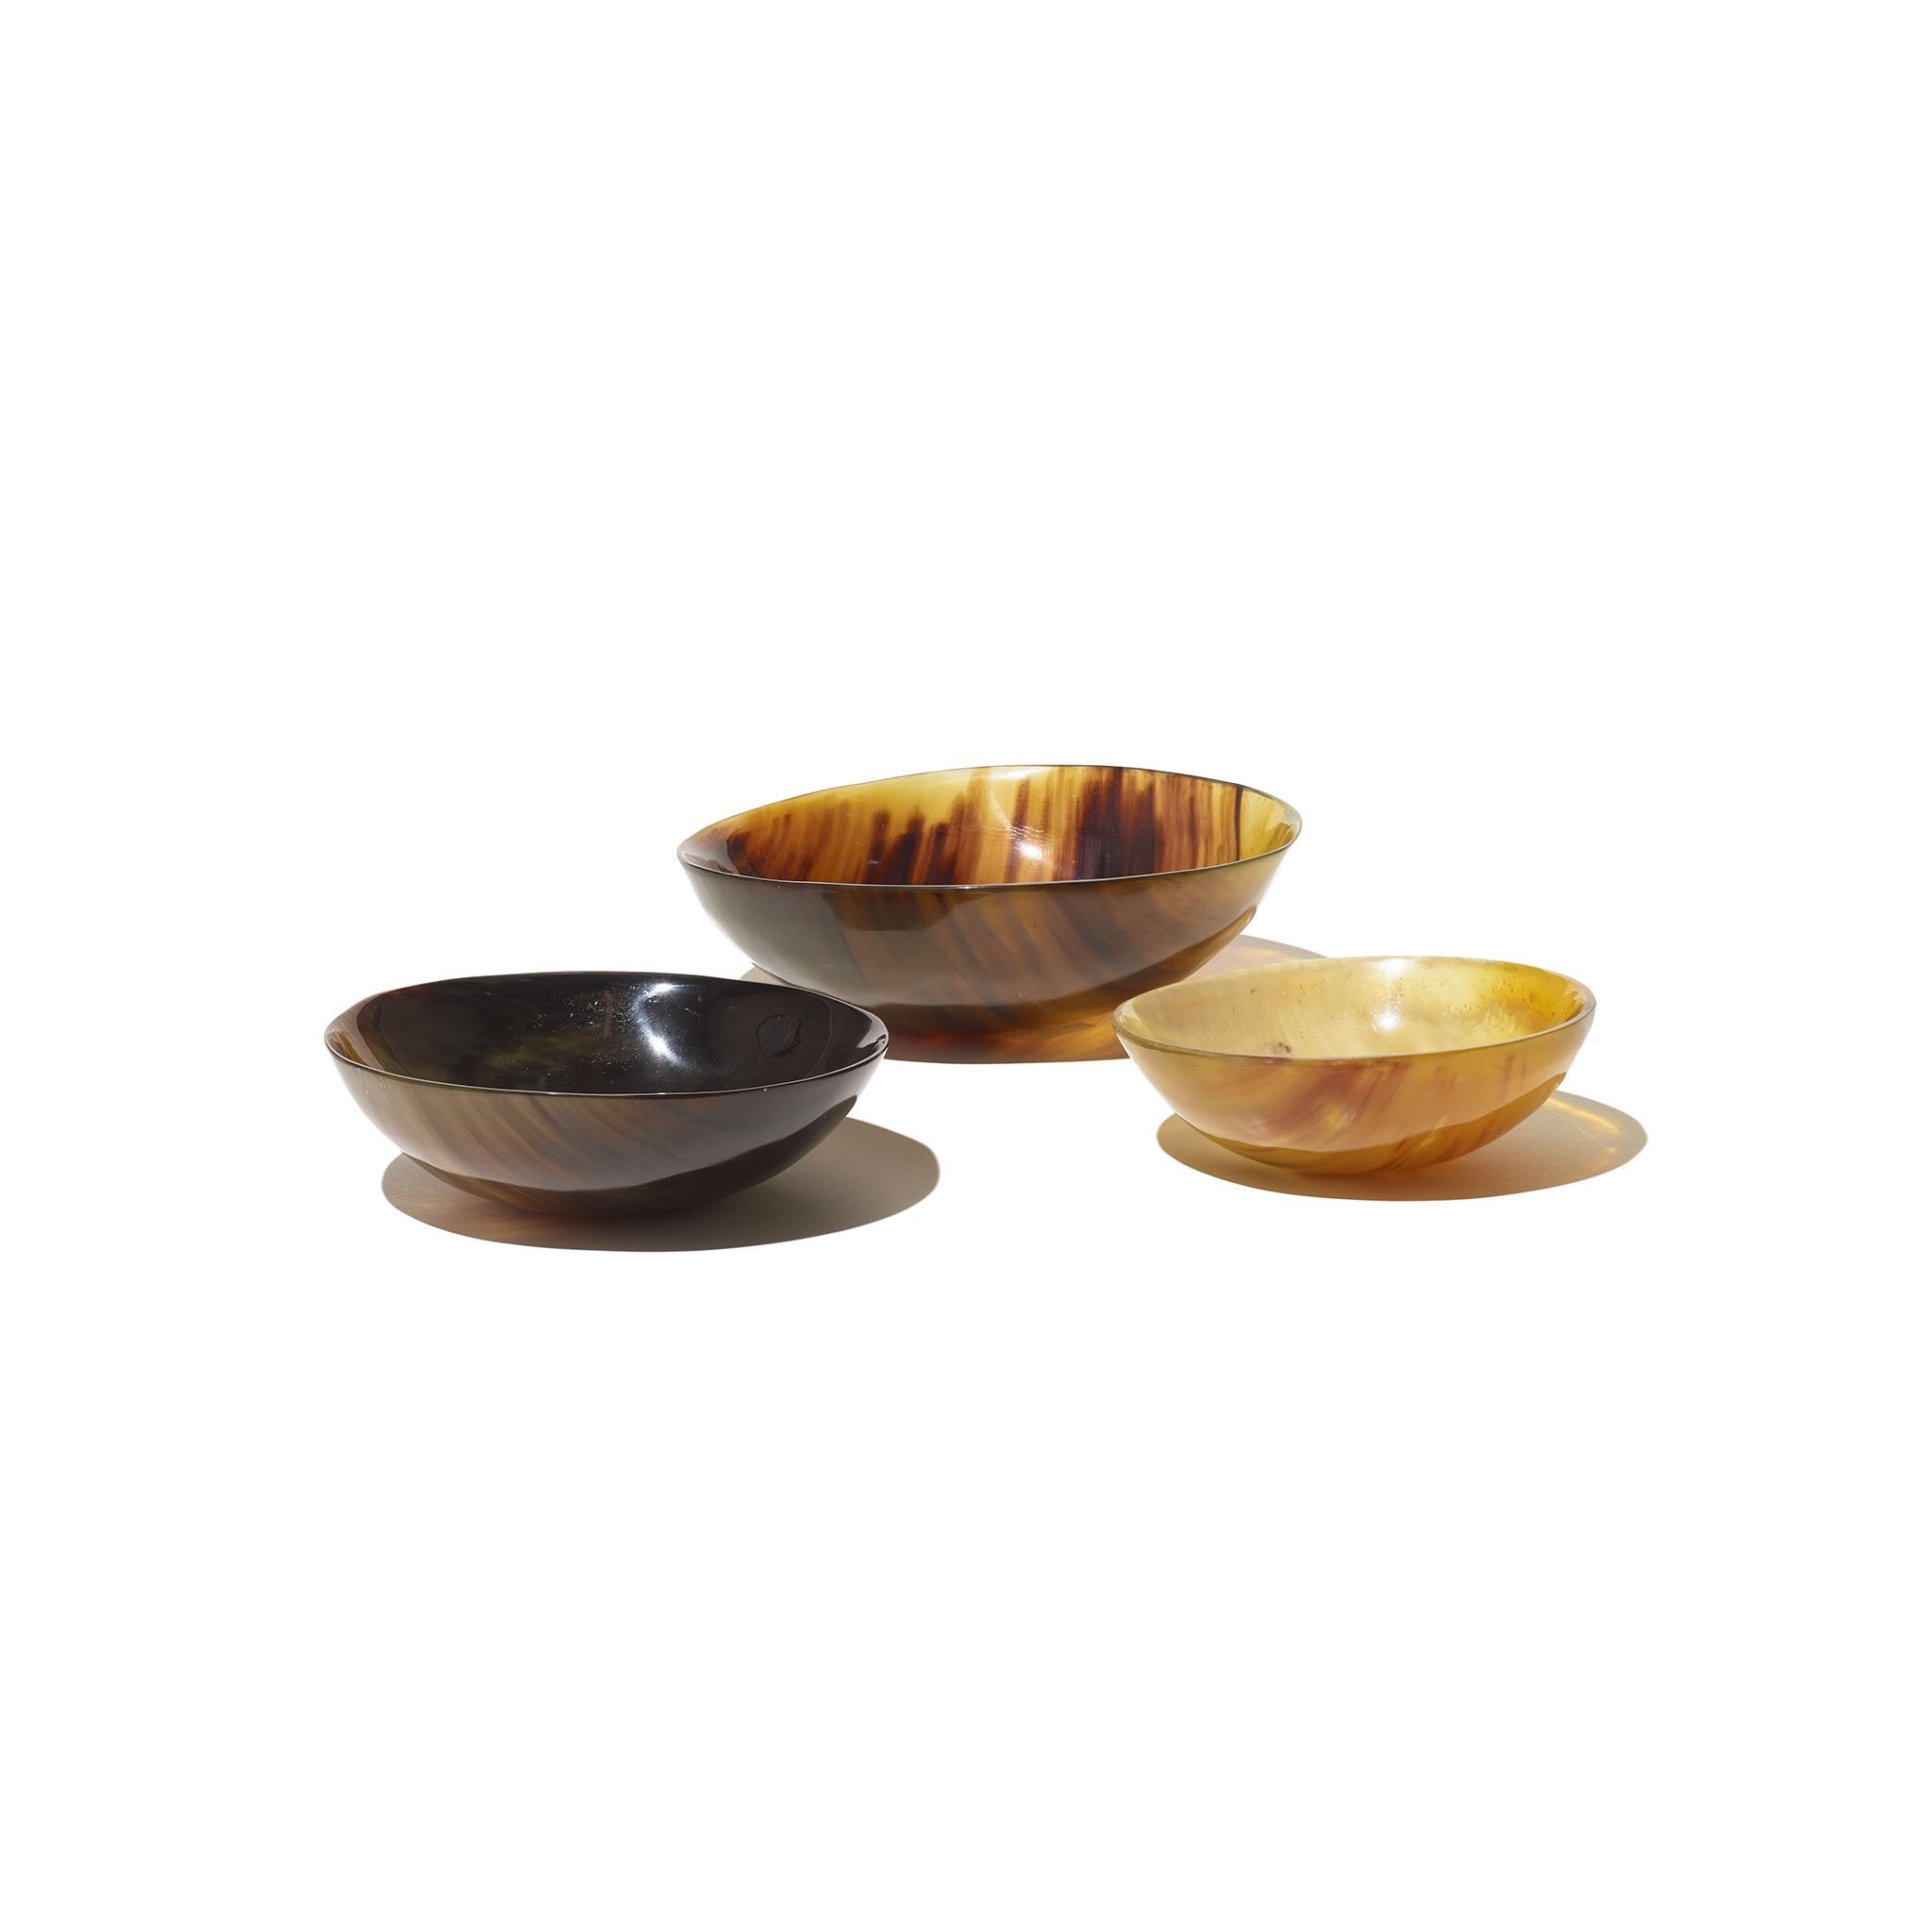 Make brunch even more special with these nesting bowls handcrafted from upcycled horn.